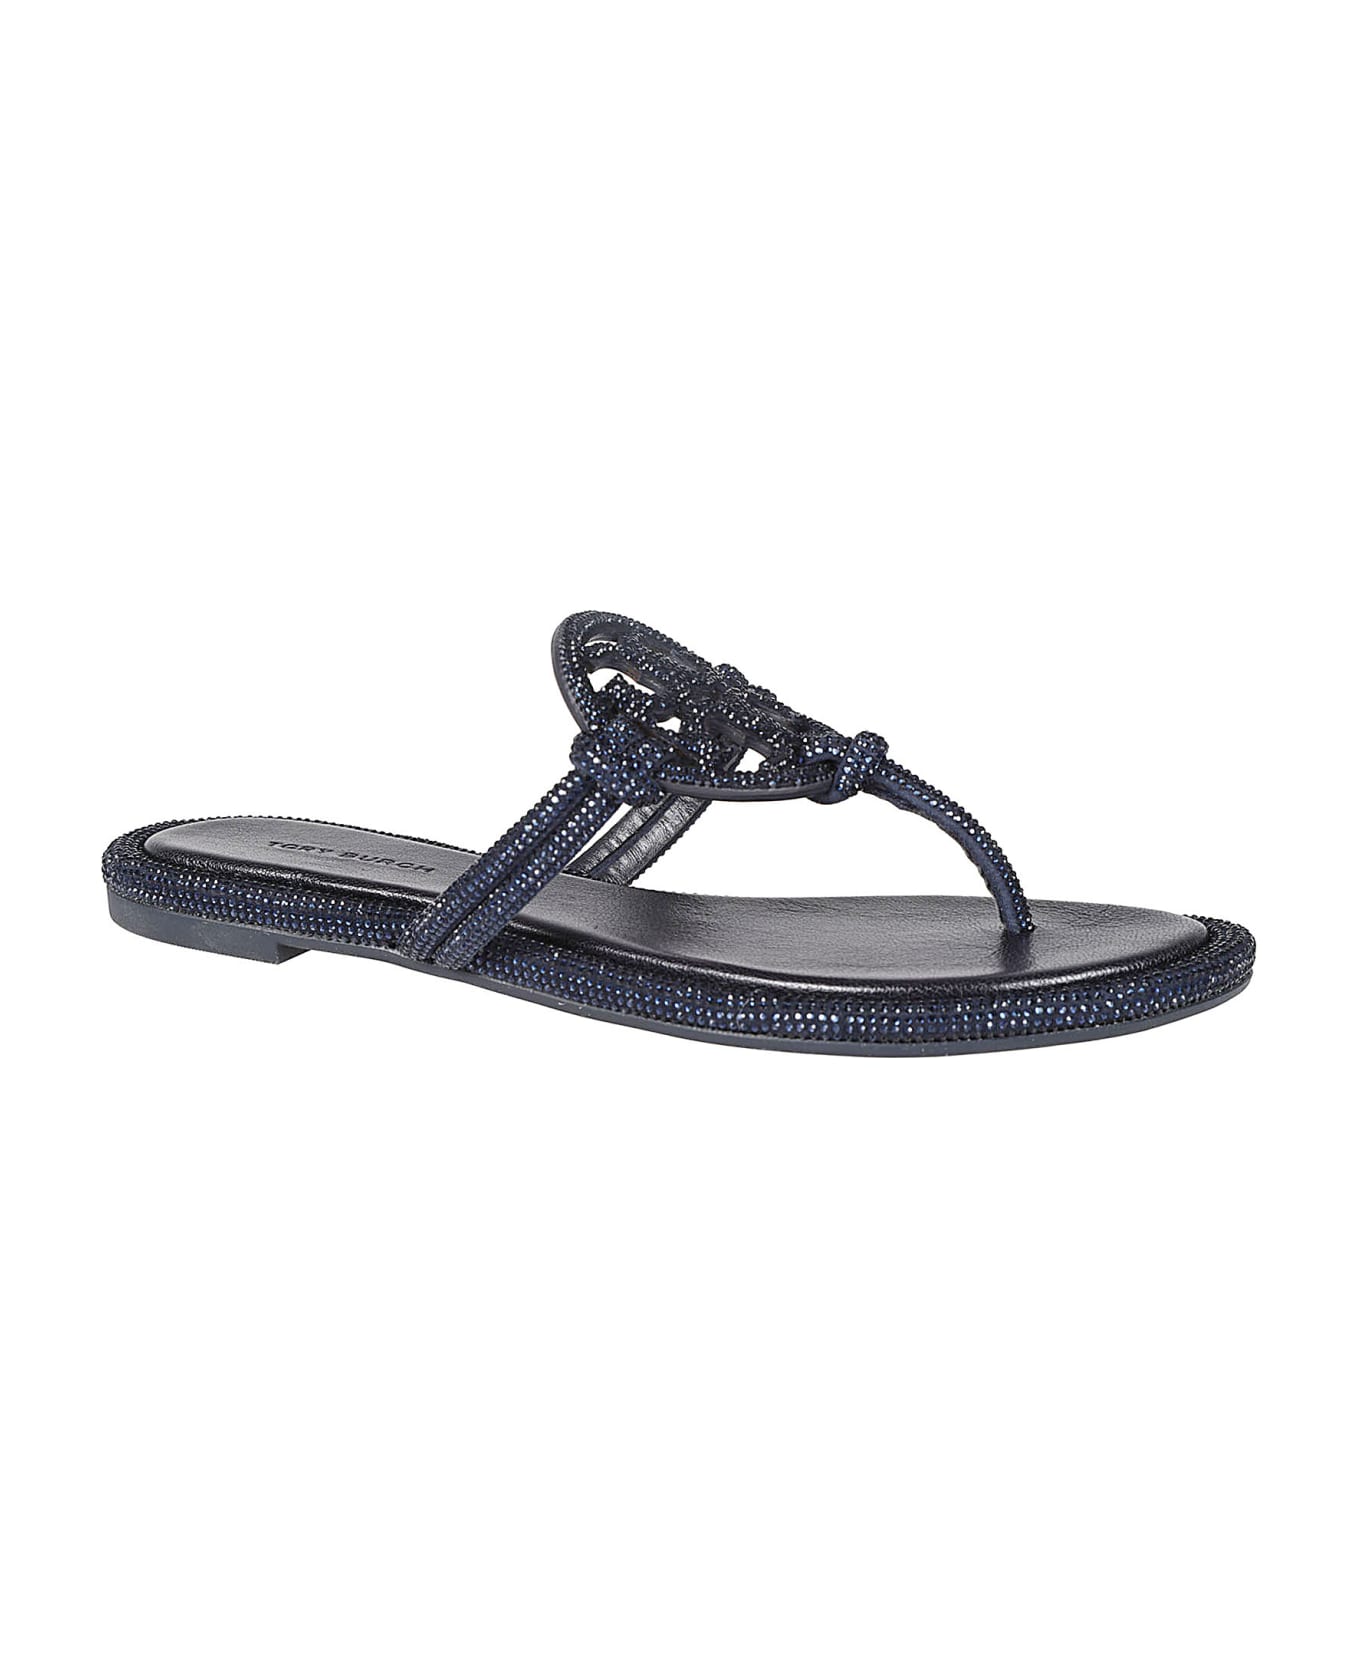 Tory Burch Miller Knotted Pave Embellished Sandals - Navy